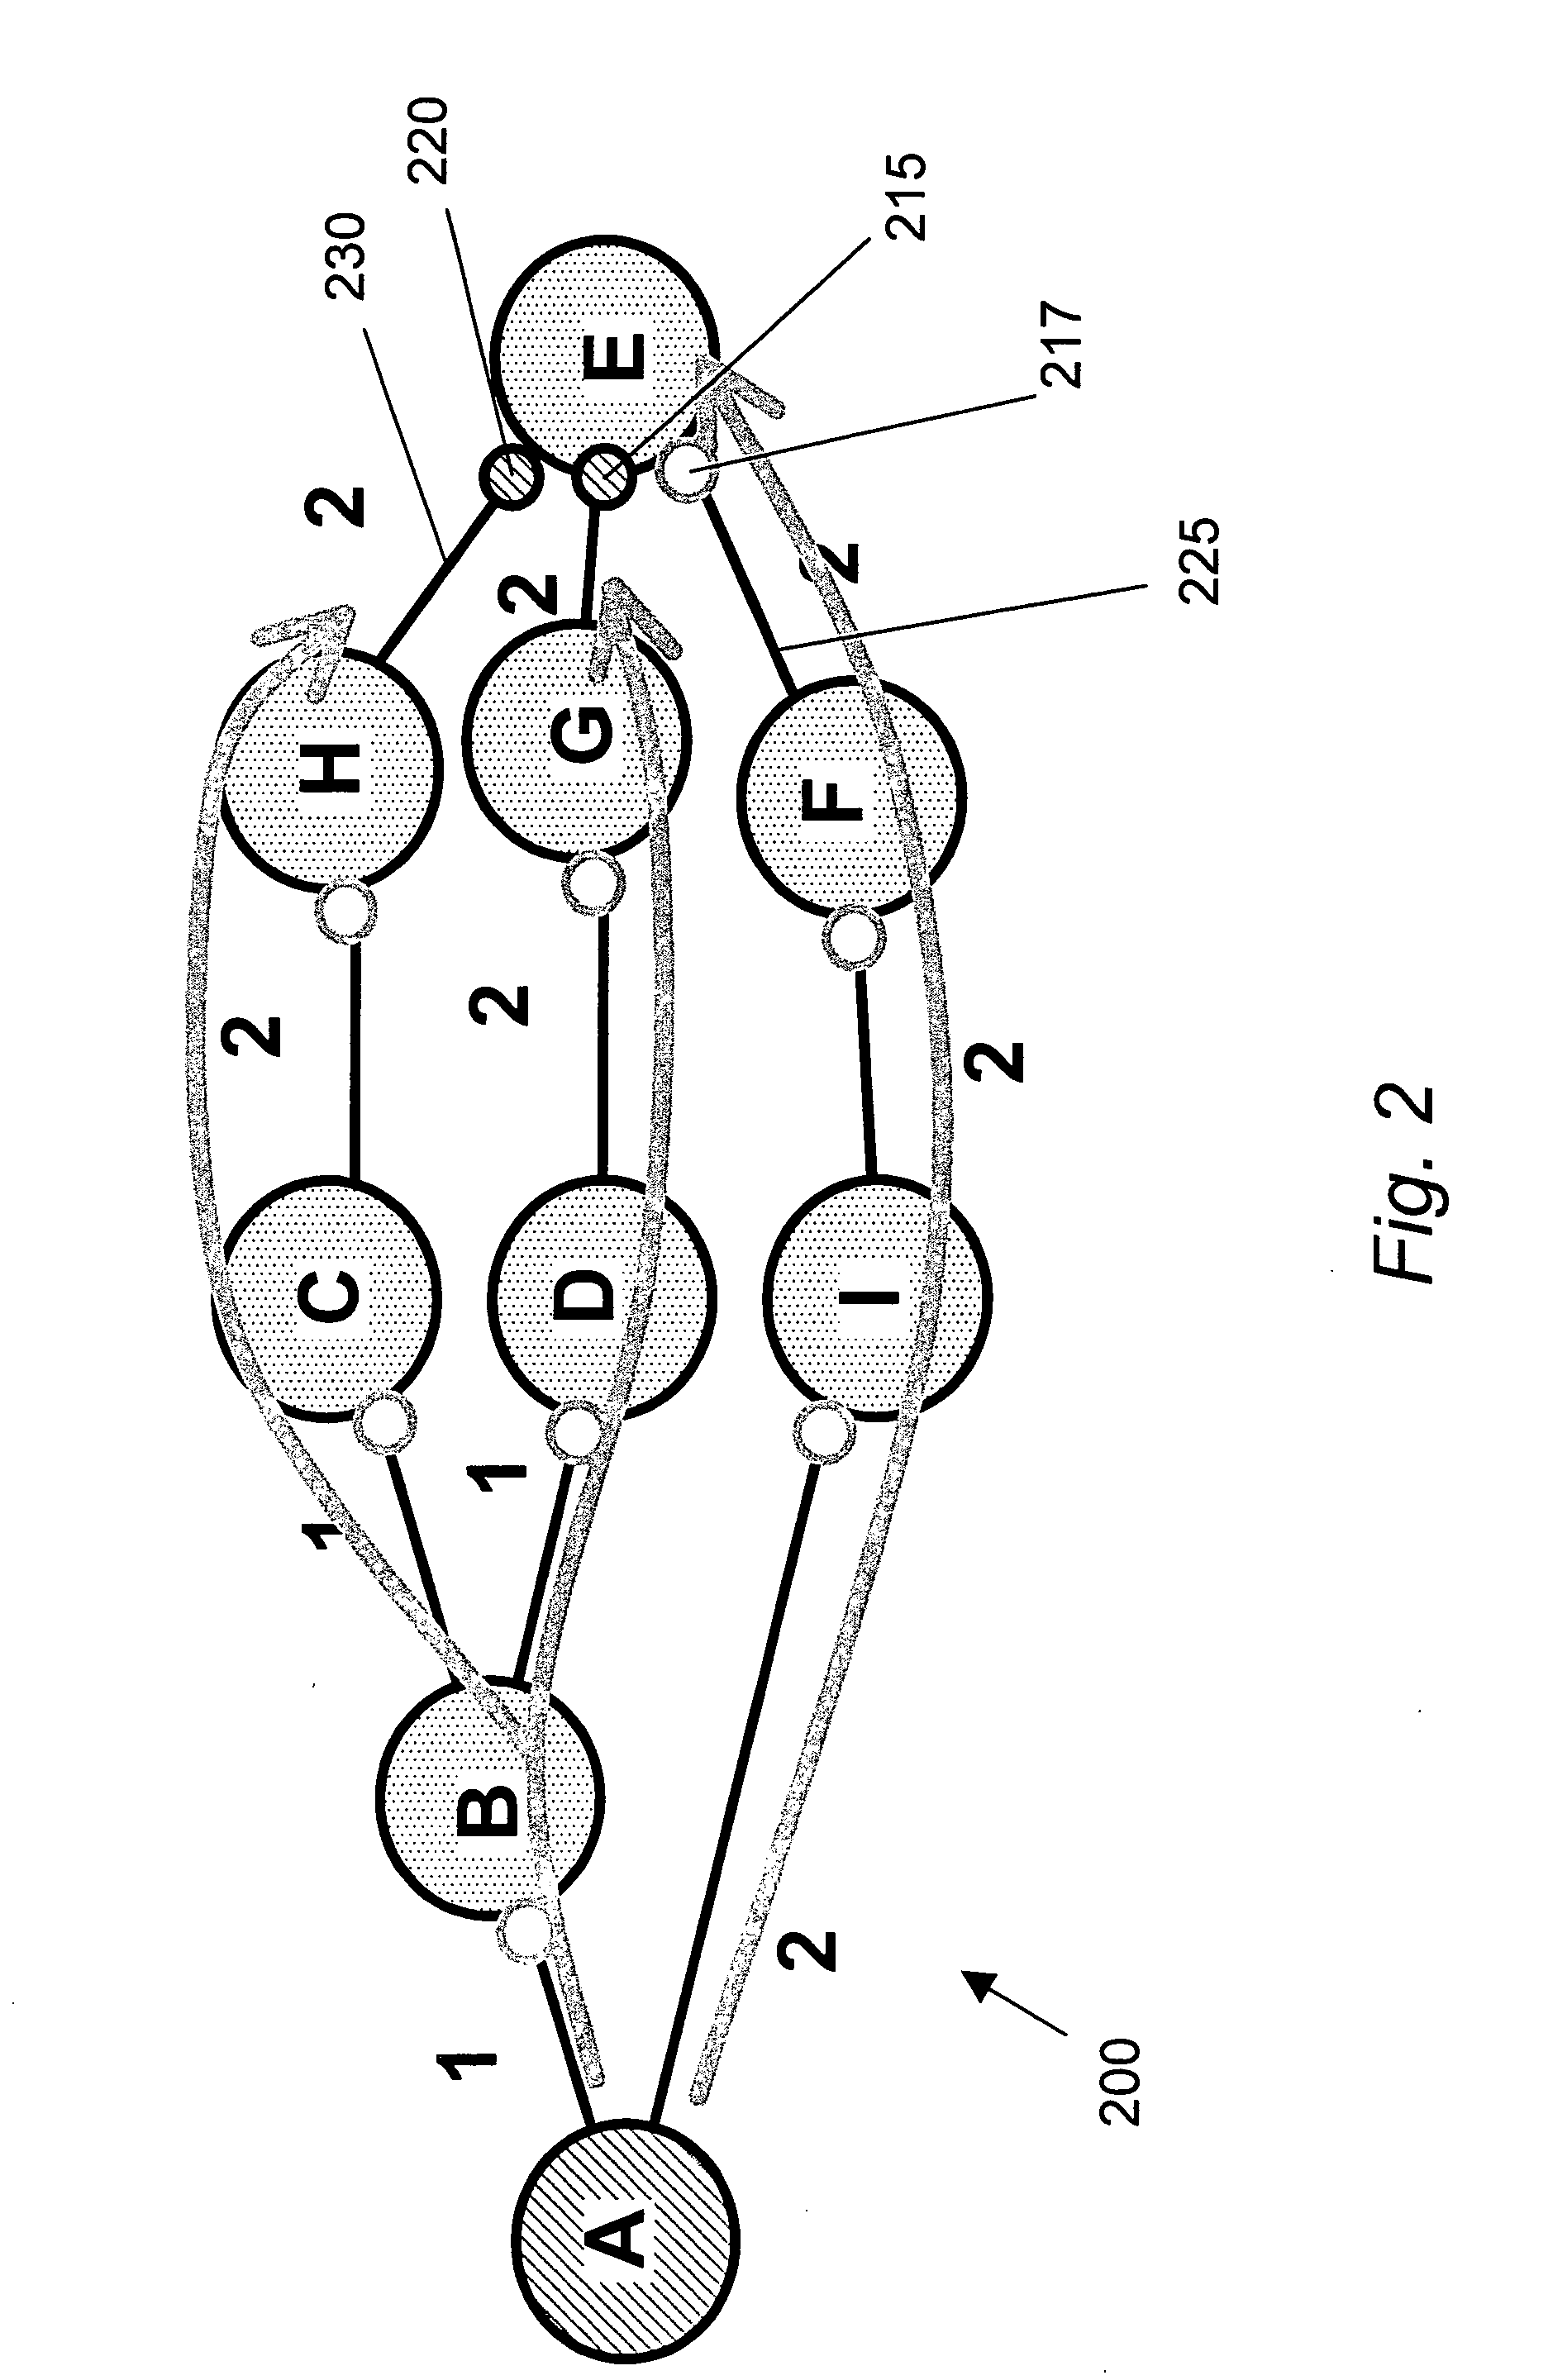 Methods and devices for improving the multiple spanning tree protocol